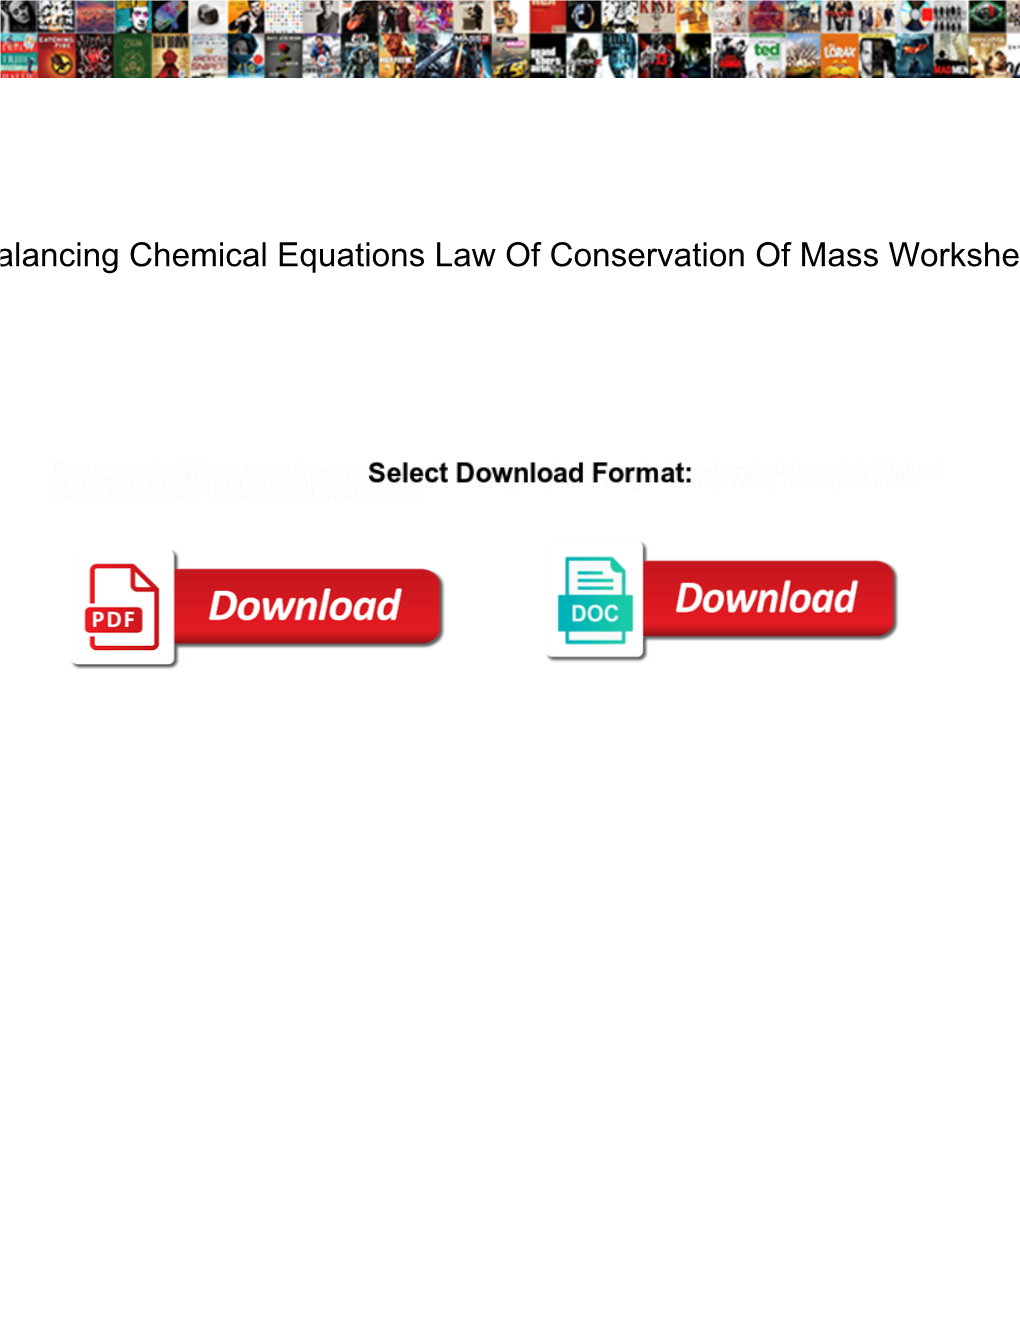 Balancing Chemical Equations Law of Conservation of Mass Worksheet